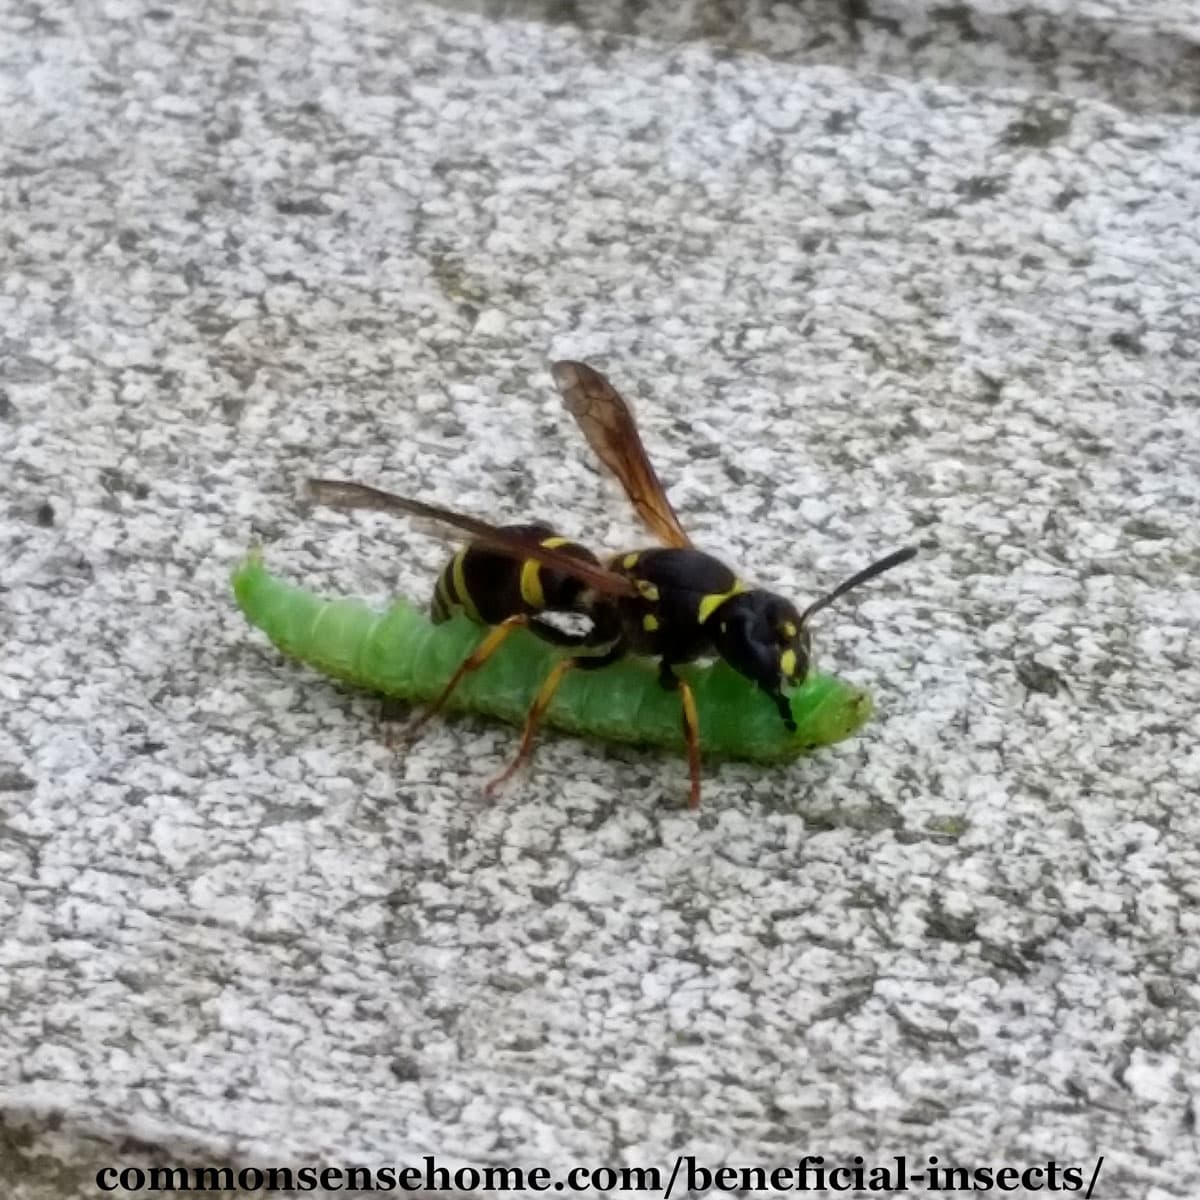 wasp eating cabbage worm is a predatory beneficial insect